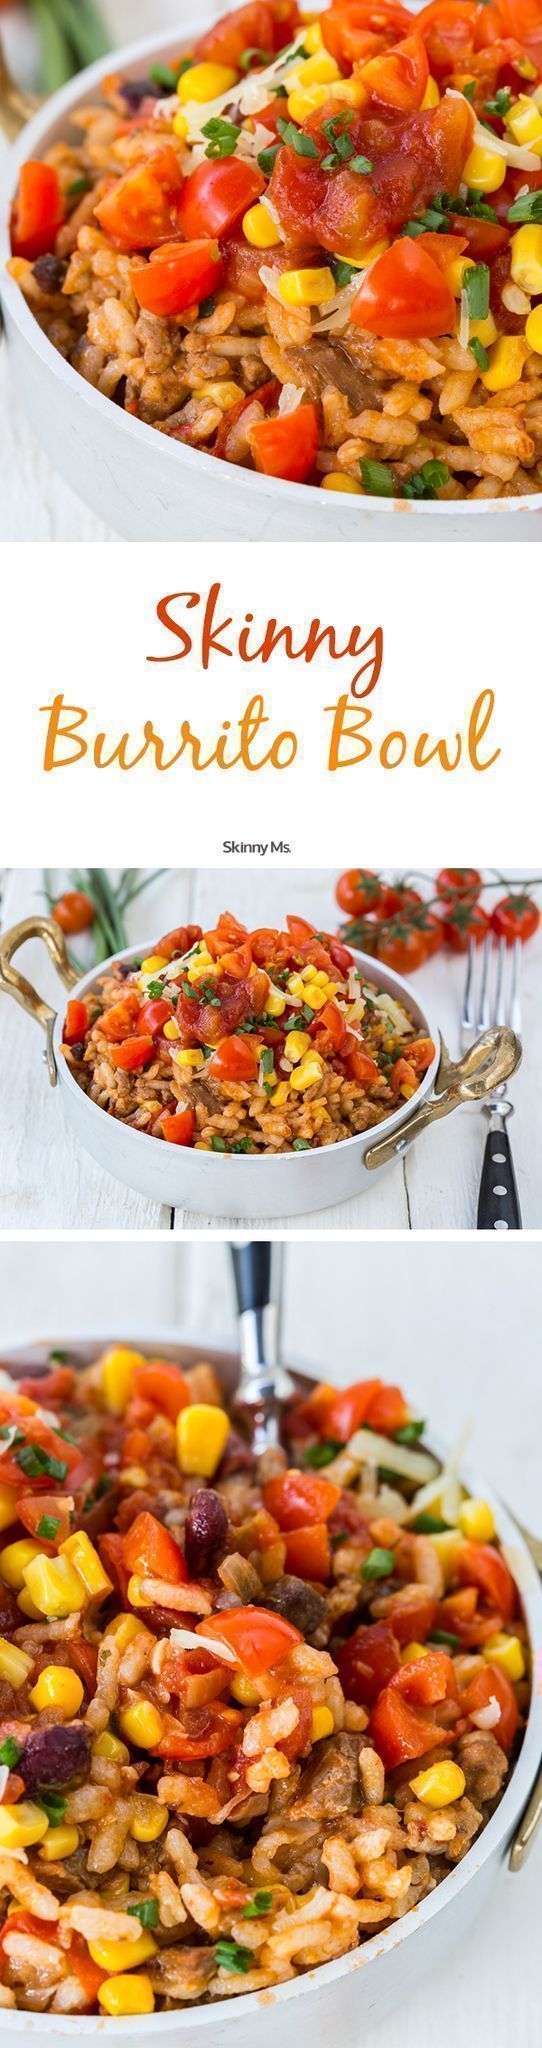 Por favor! These Skinny Ms. Burrito Bowls are so yummy that the tortilla won’t be missed. #recipes